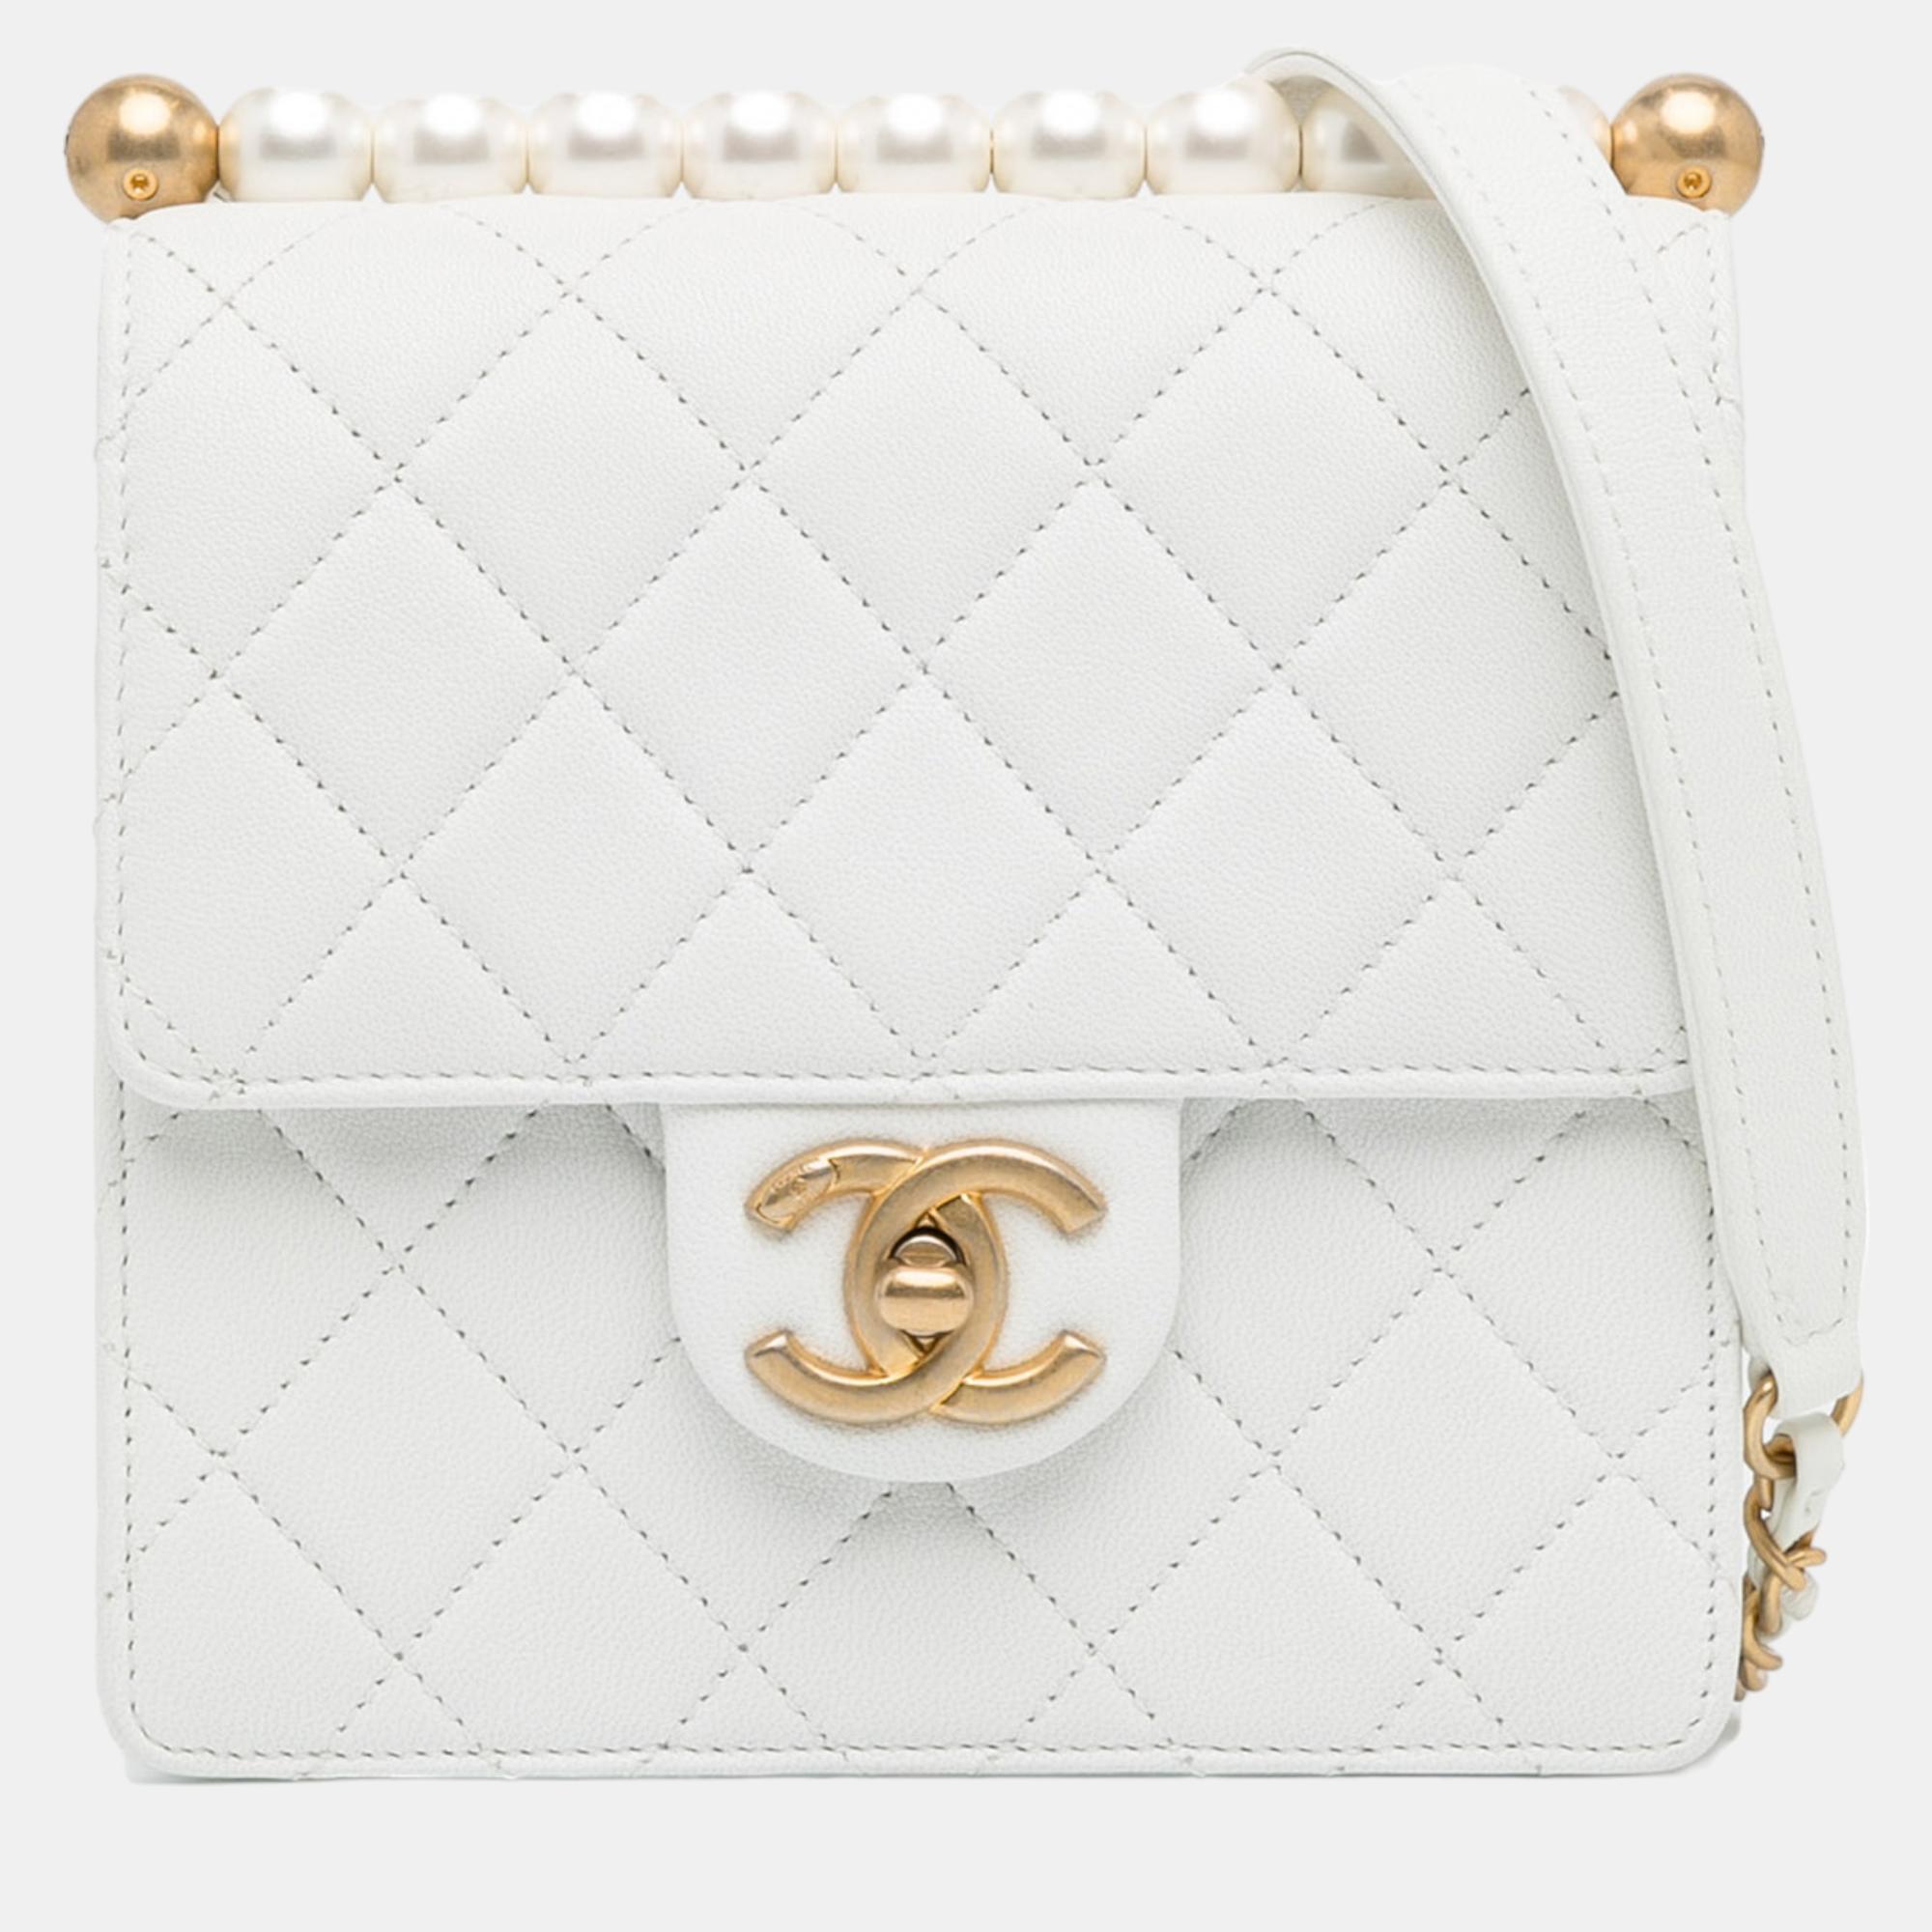 Chanel white small lambskin chic pearls flap